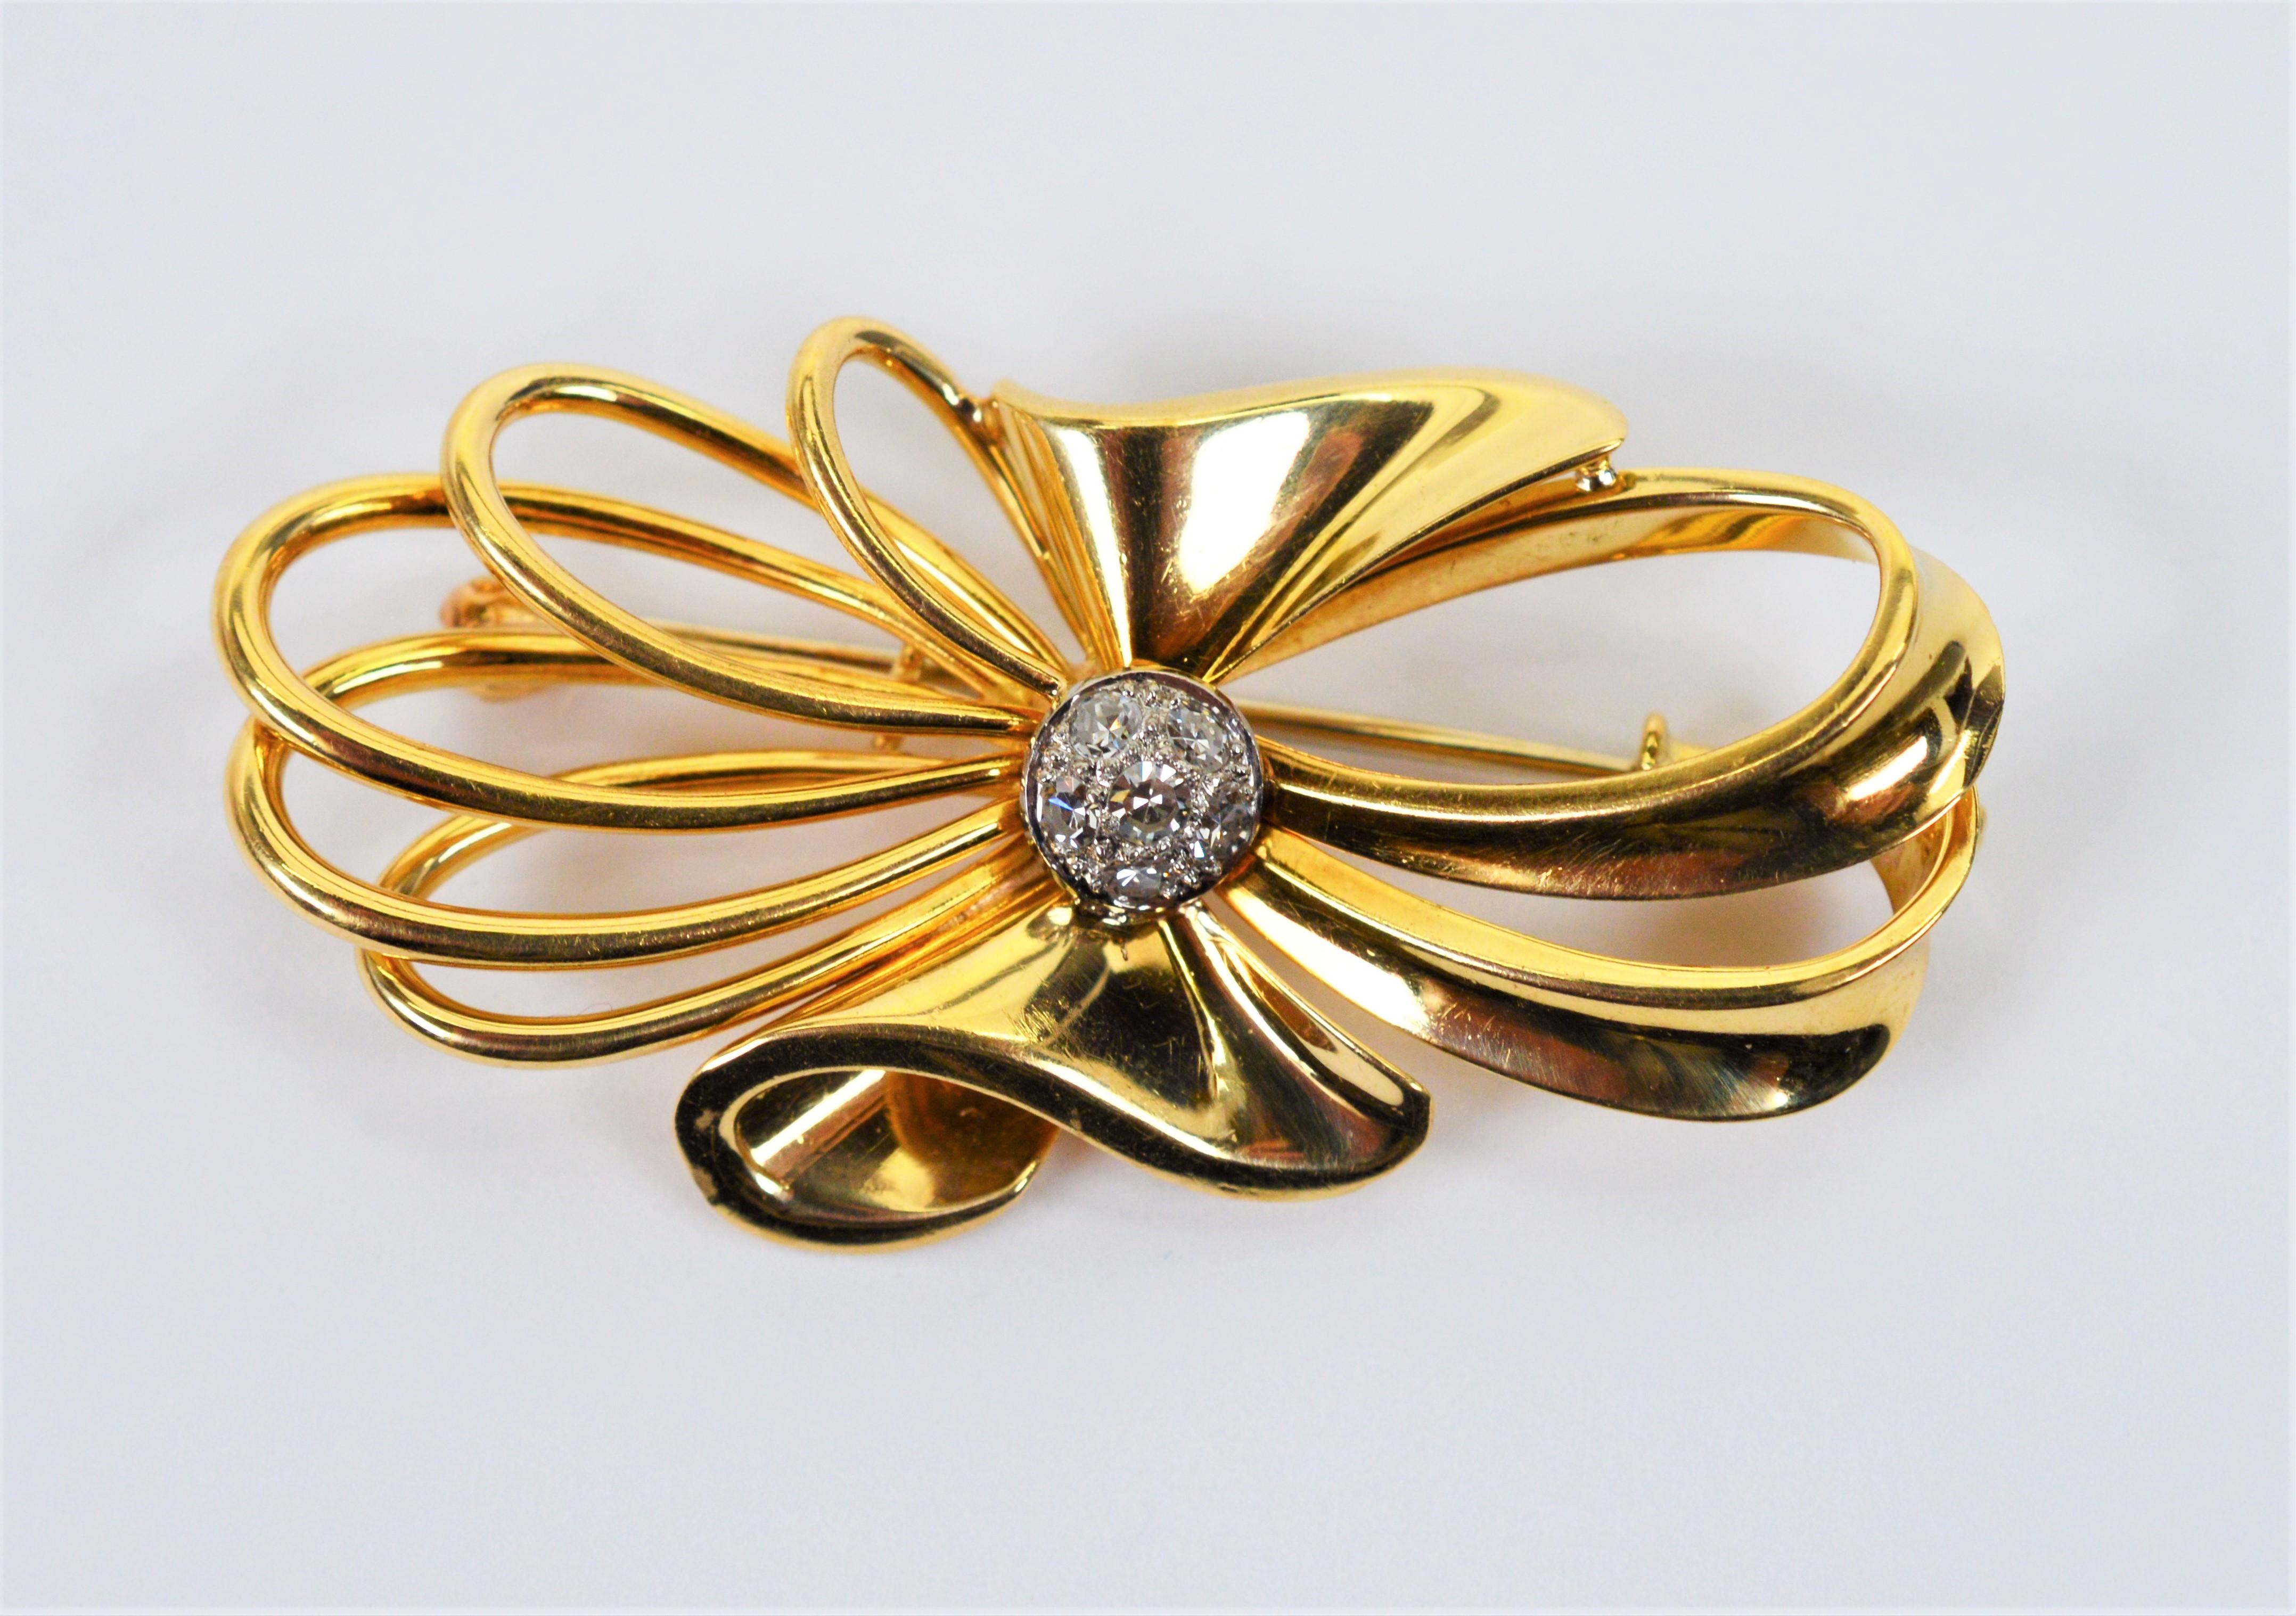 Vintage 18 Karat Yellow Gold Bowtie Brooch with Diamond Accents 4